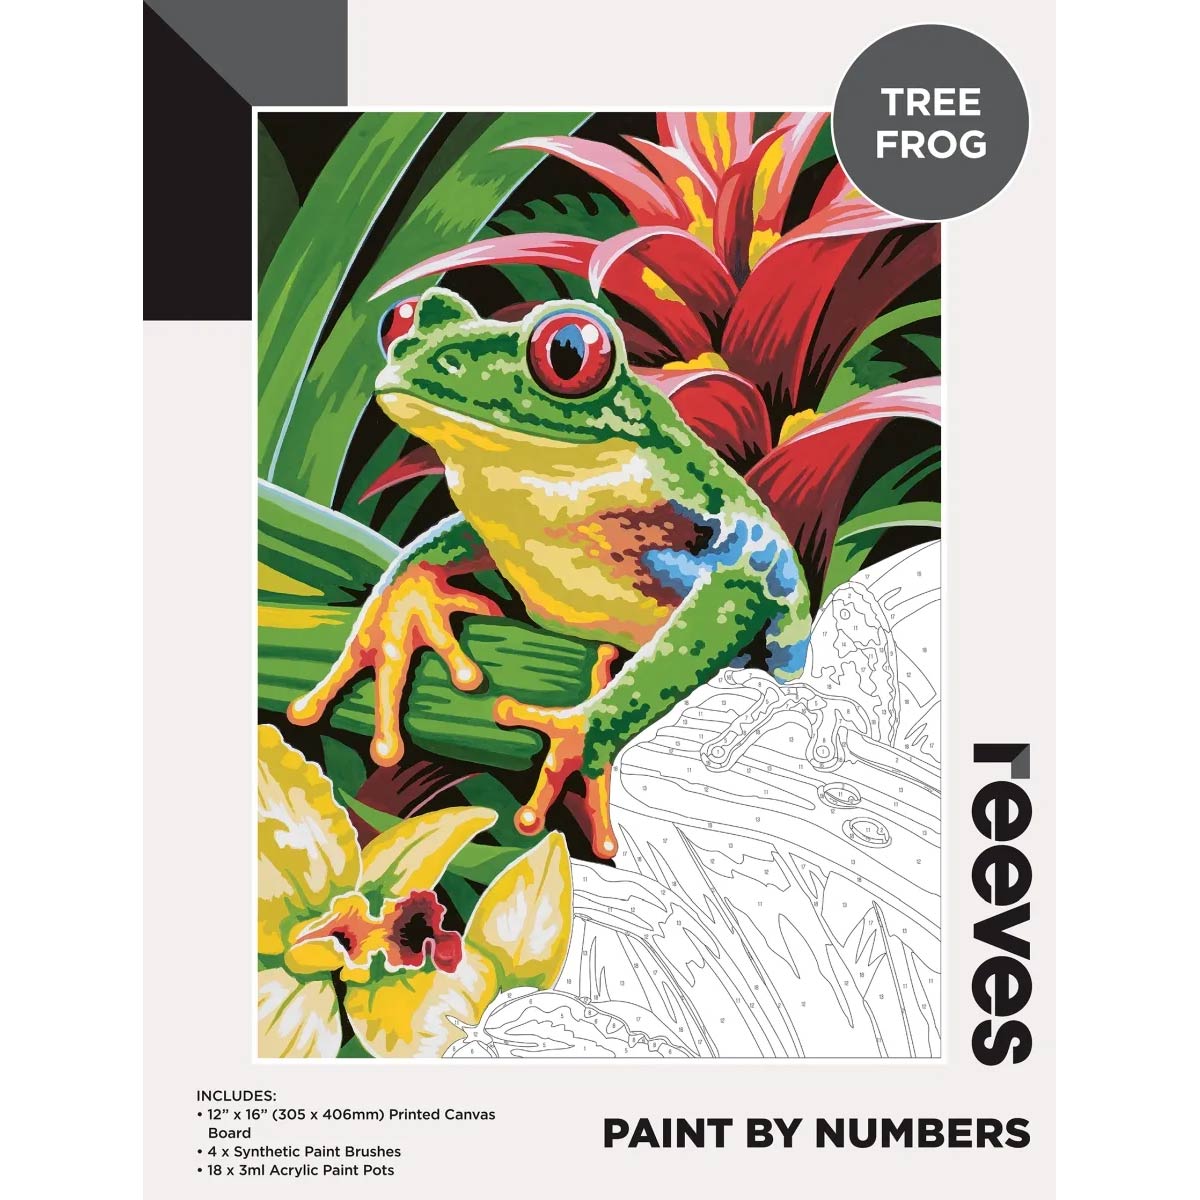 Reeves Paint by Numbers Large 12x16 inch - Tree Frog